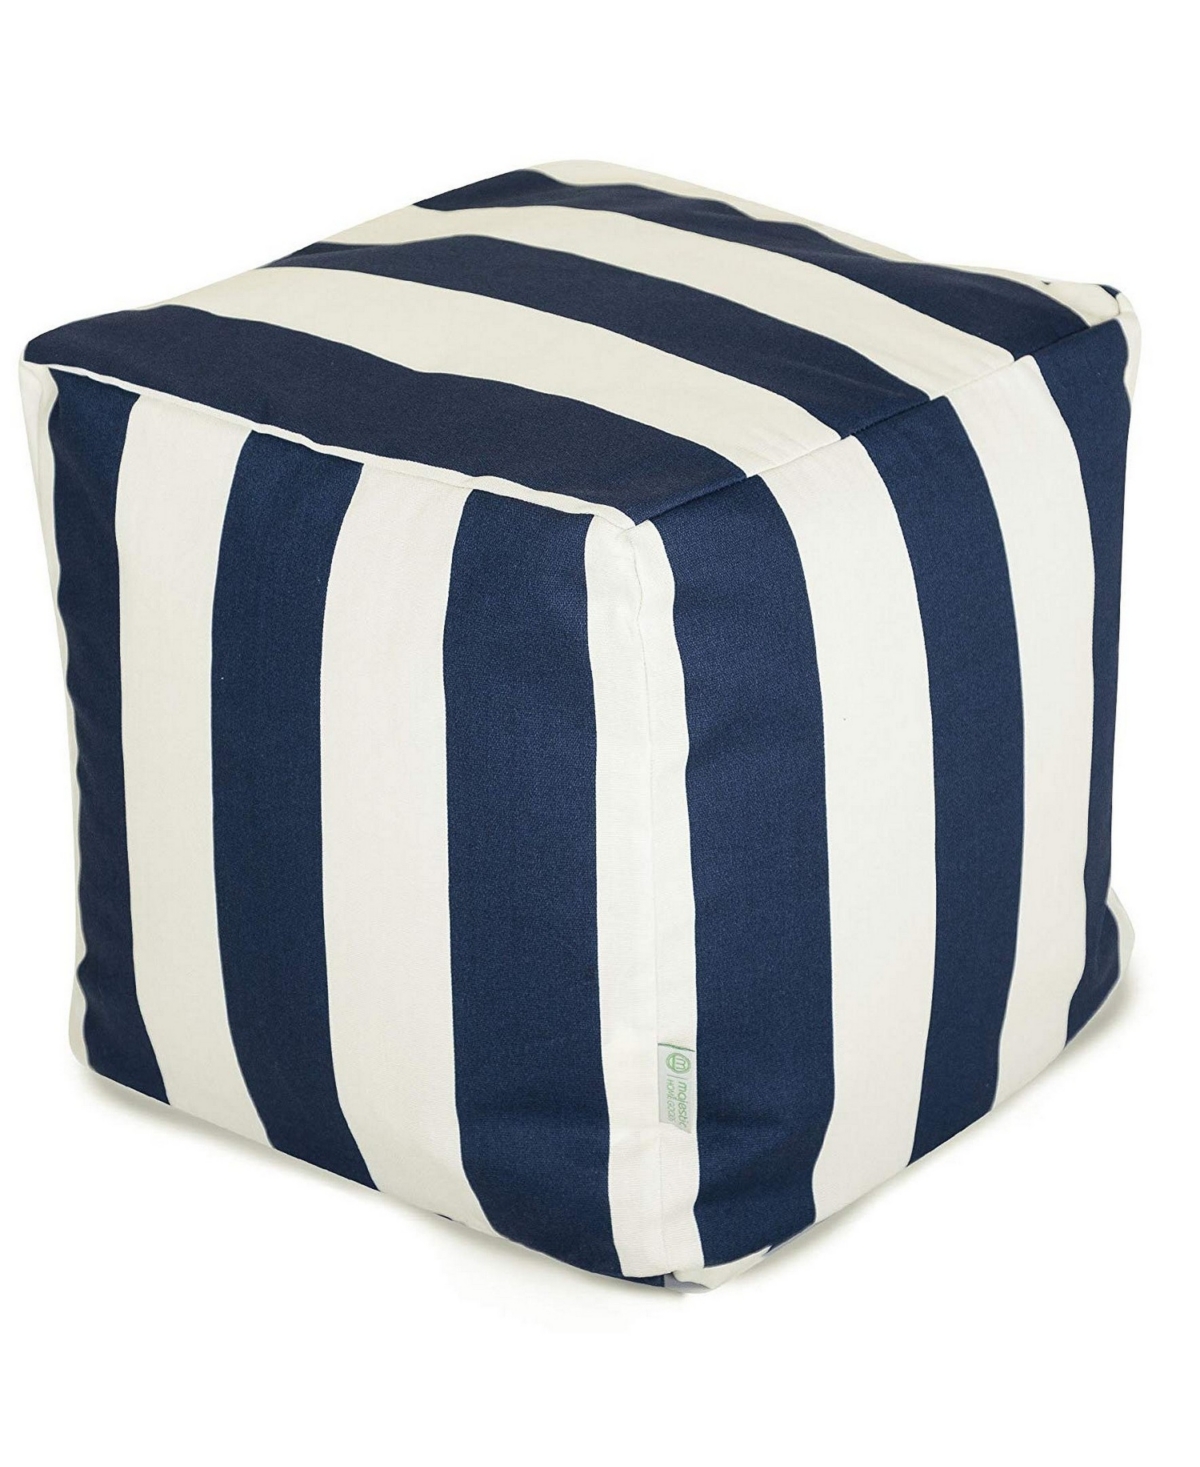 UPC 859072201224 product image for Majestic Home Goods Vertical Stripe Ottoman Pouf Cube 17